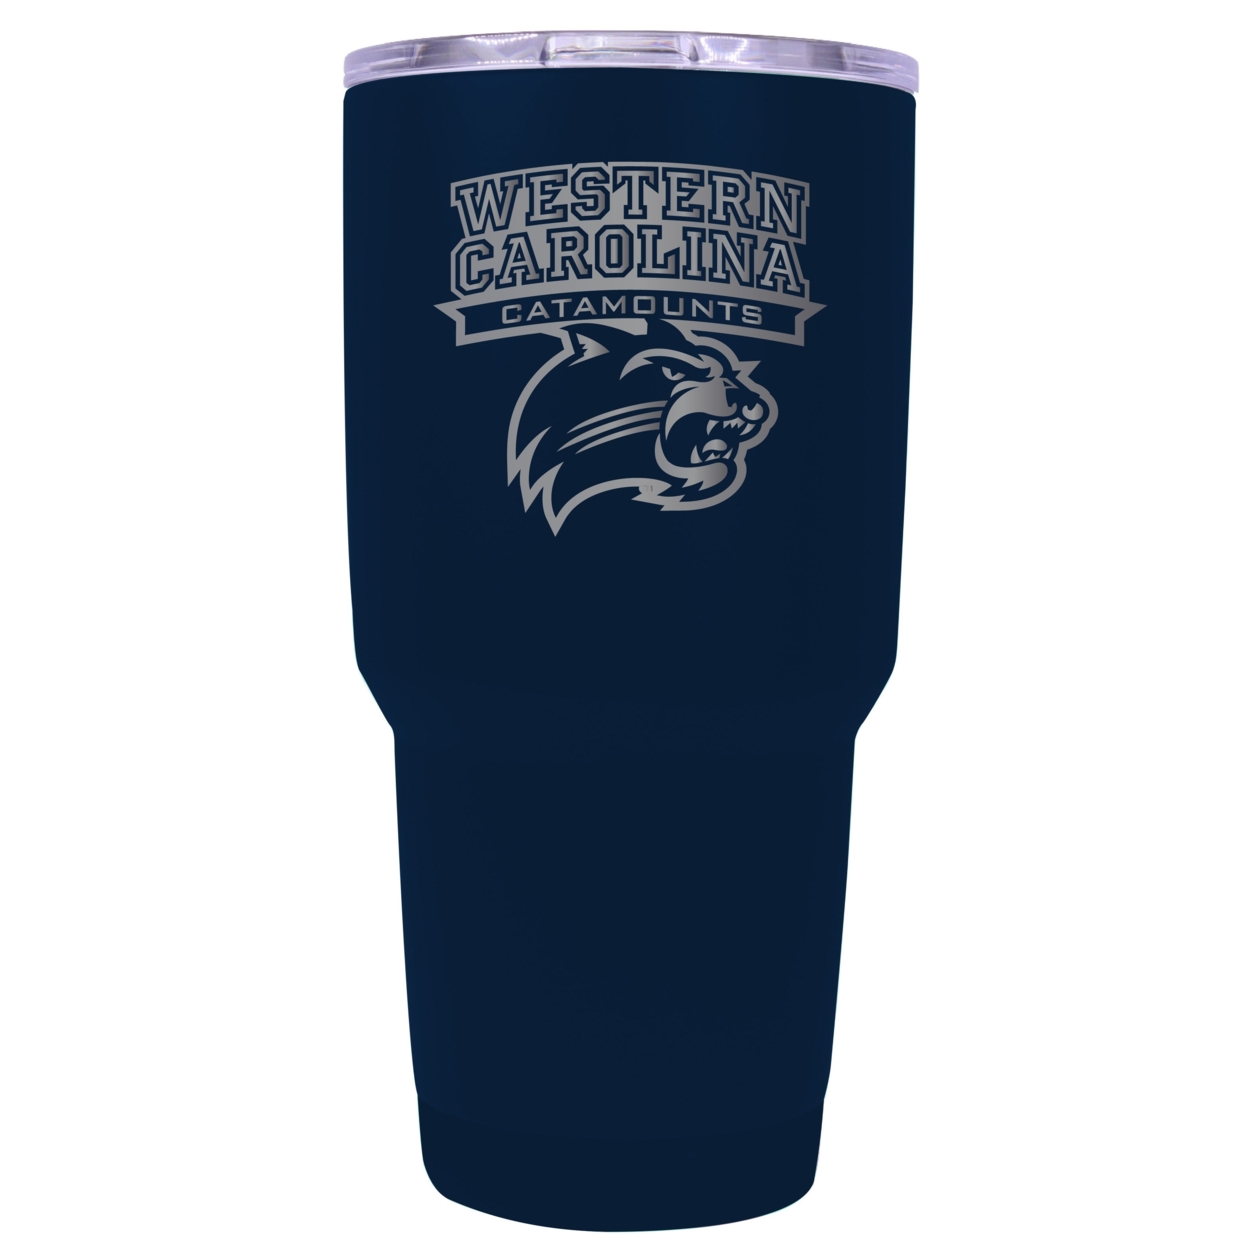 Western Carolina University 24 Oz Laser Engraved Stainless Steel Insulated Tumbler - Choose Your Color. - Seafoam